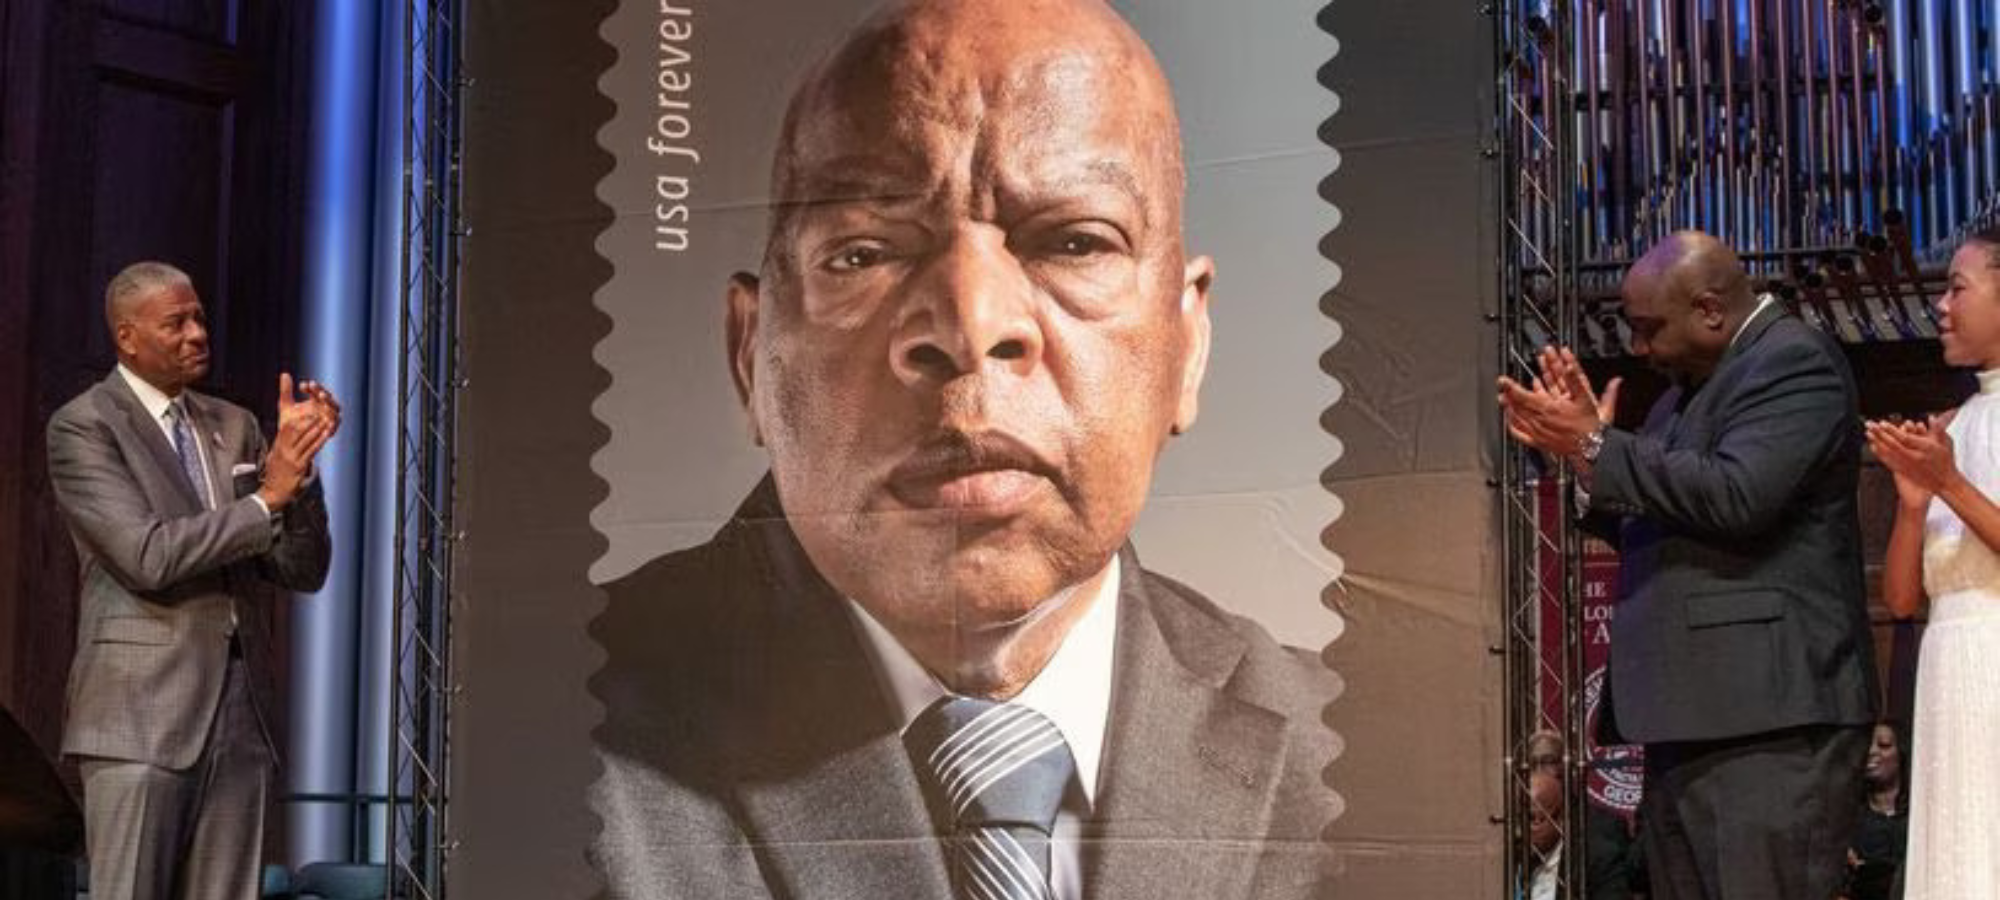 Opinion: A well-earned stamp of approval for John Lewis